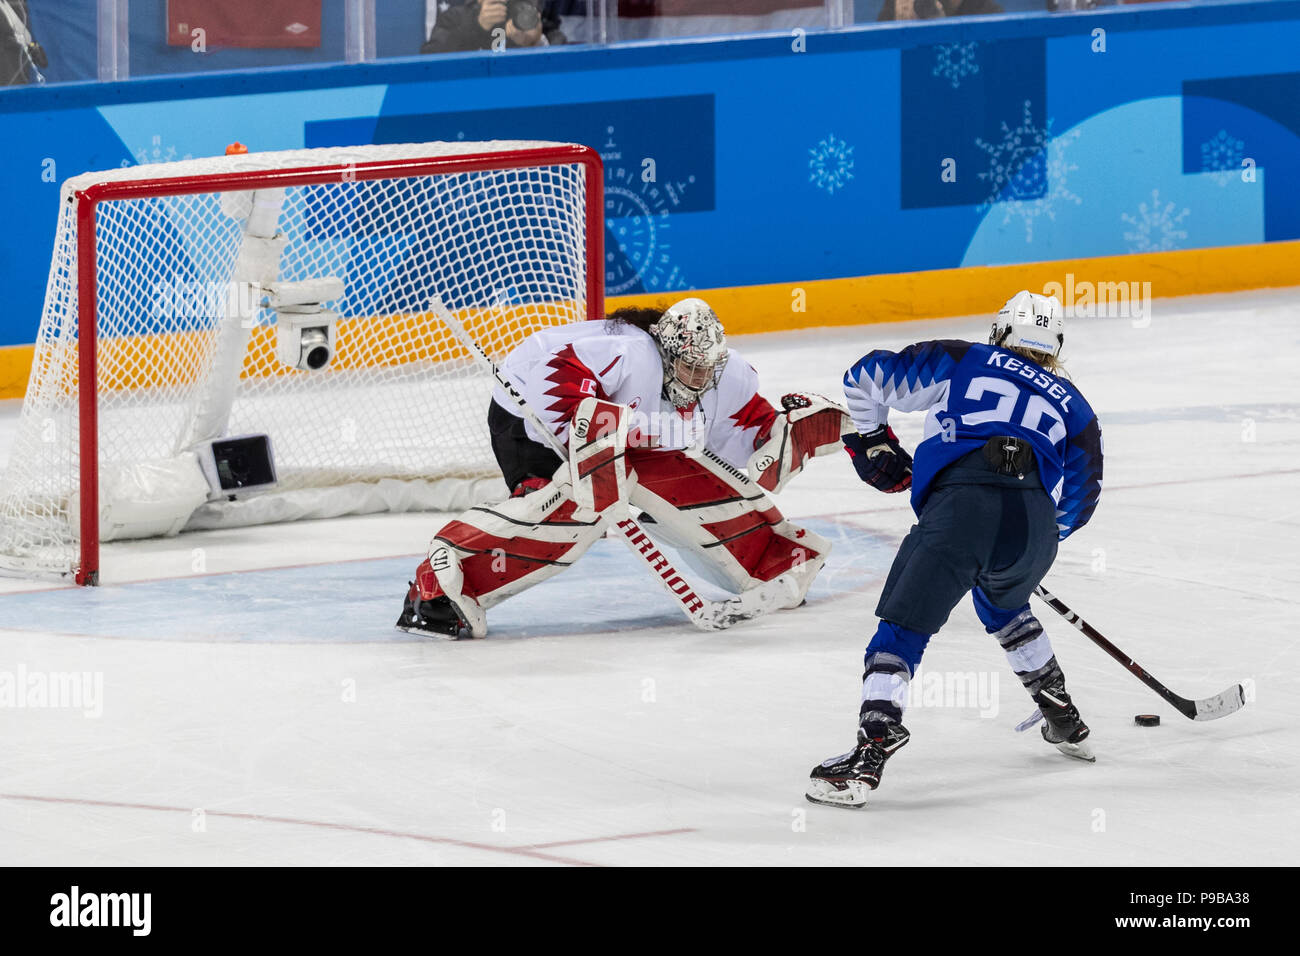 Goalie Shannon Szabados (CAN) during the Gold medal Women's Ice Hockey game USA vs Canada at the Olympic Winter Games PyeongChang 2018 Stock Photo